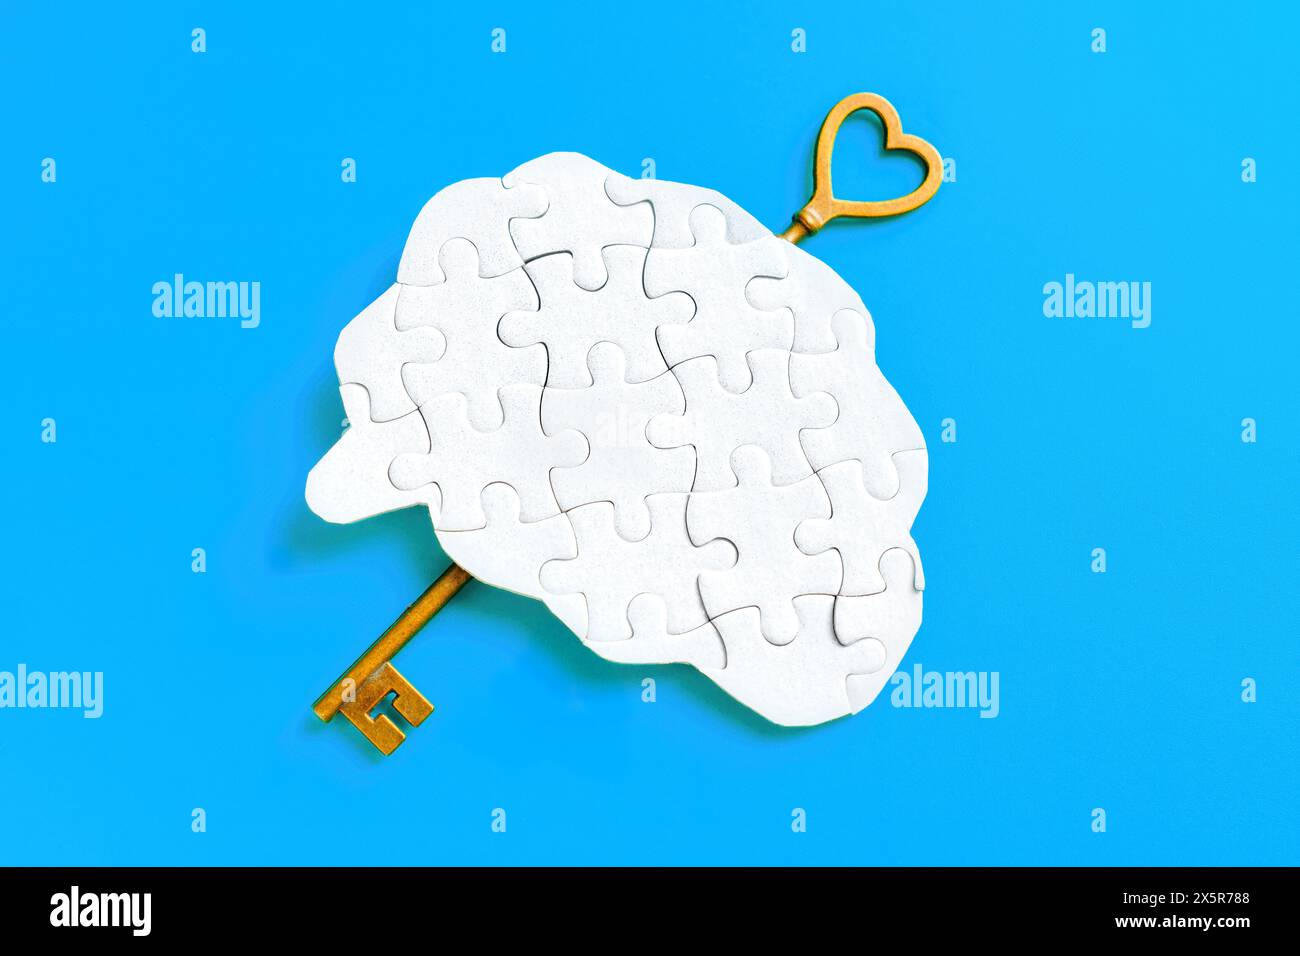 Long key inserted into a human brain-shaped puzzle isolated on blue background, symbolizing the unlocking of potential and knowledge. Stock Photo